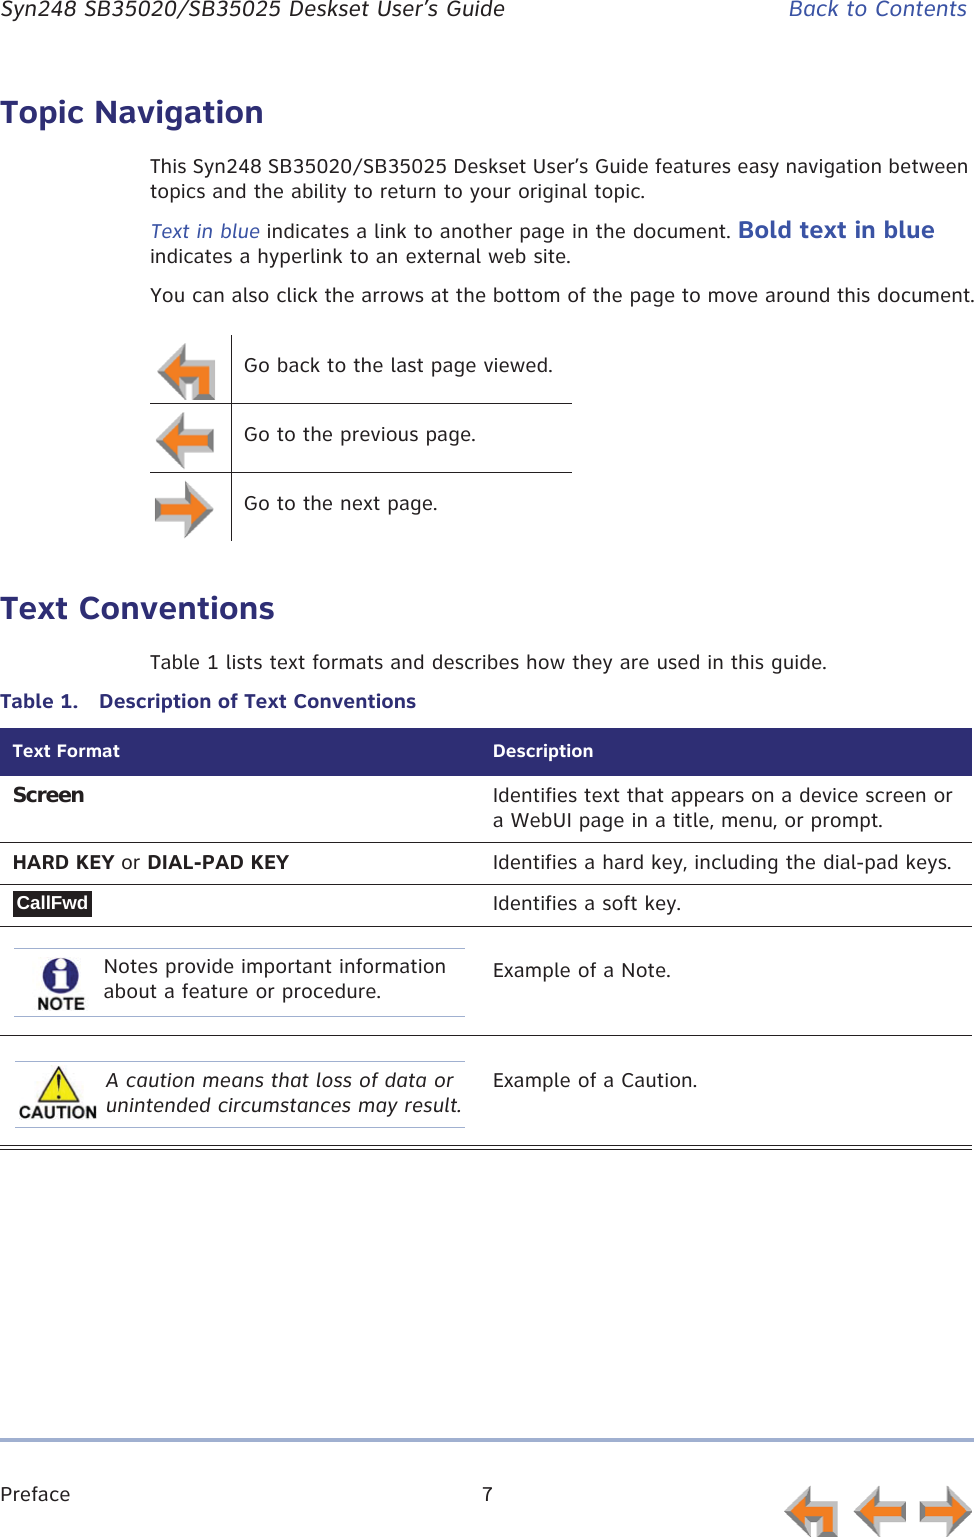 Preface 7      Syn248 SB35020/SB35025 Deskset User’s Guide Back to ContentsTopic NavigationThis Syn248 SB35020/SB35025 Deskset User’s Guide features easy navigation between topics and the ability to return to your original topic.Text in blue indicates a link to another page in the document. Bold text in blue indicates a hyperlink to an external web site.You can also click the arrows at the bottom of the page to move around this document.Text ConventionsTable 1 lists text formats and describes how they are used in this guide.Go back to the last page viewed.Go to the previous page.Go to the next page.Table 1.  Description of Text ConventionsText Format DescriptionScreen Identifies text that appears on a device screen or a WebUI page in a title, menu, or prompt.HARD KEY or DIAL-PAD KEY Identifies a hard key, including the dial-pad keys.Identifies a soft key.Example of a Note.Example of a Caution.CallFwdNotes provide important information about a feature or procedure.A caution means that loss of data or unintended circumstances may result.